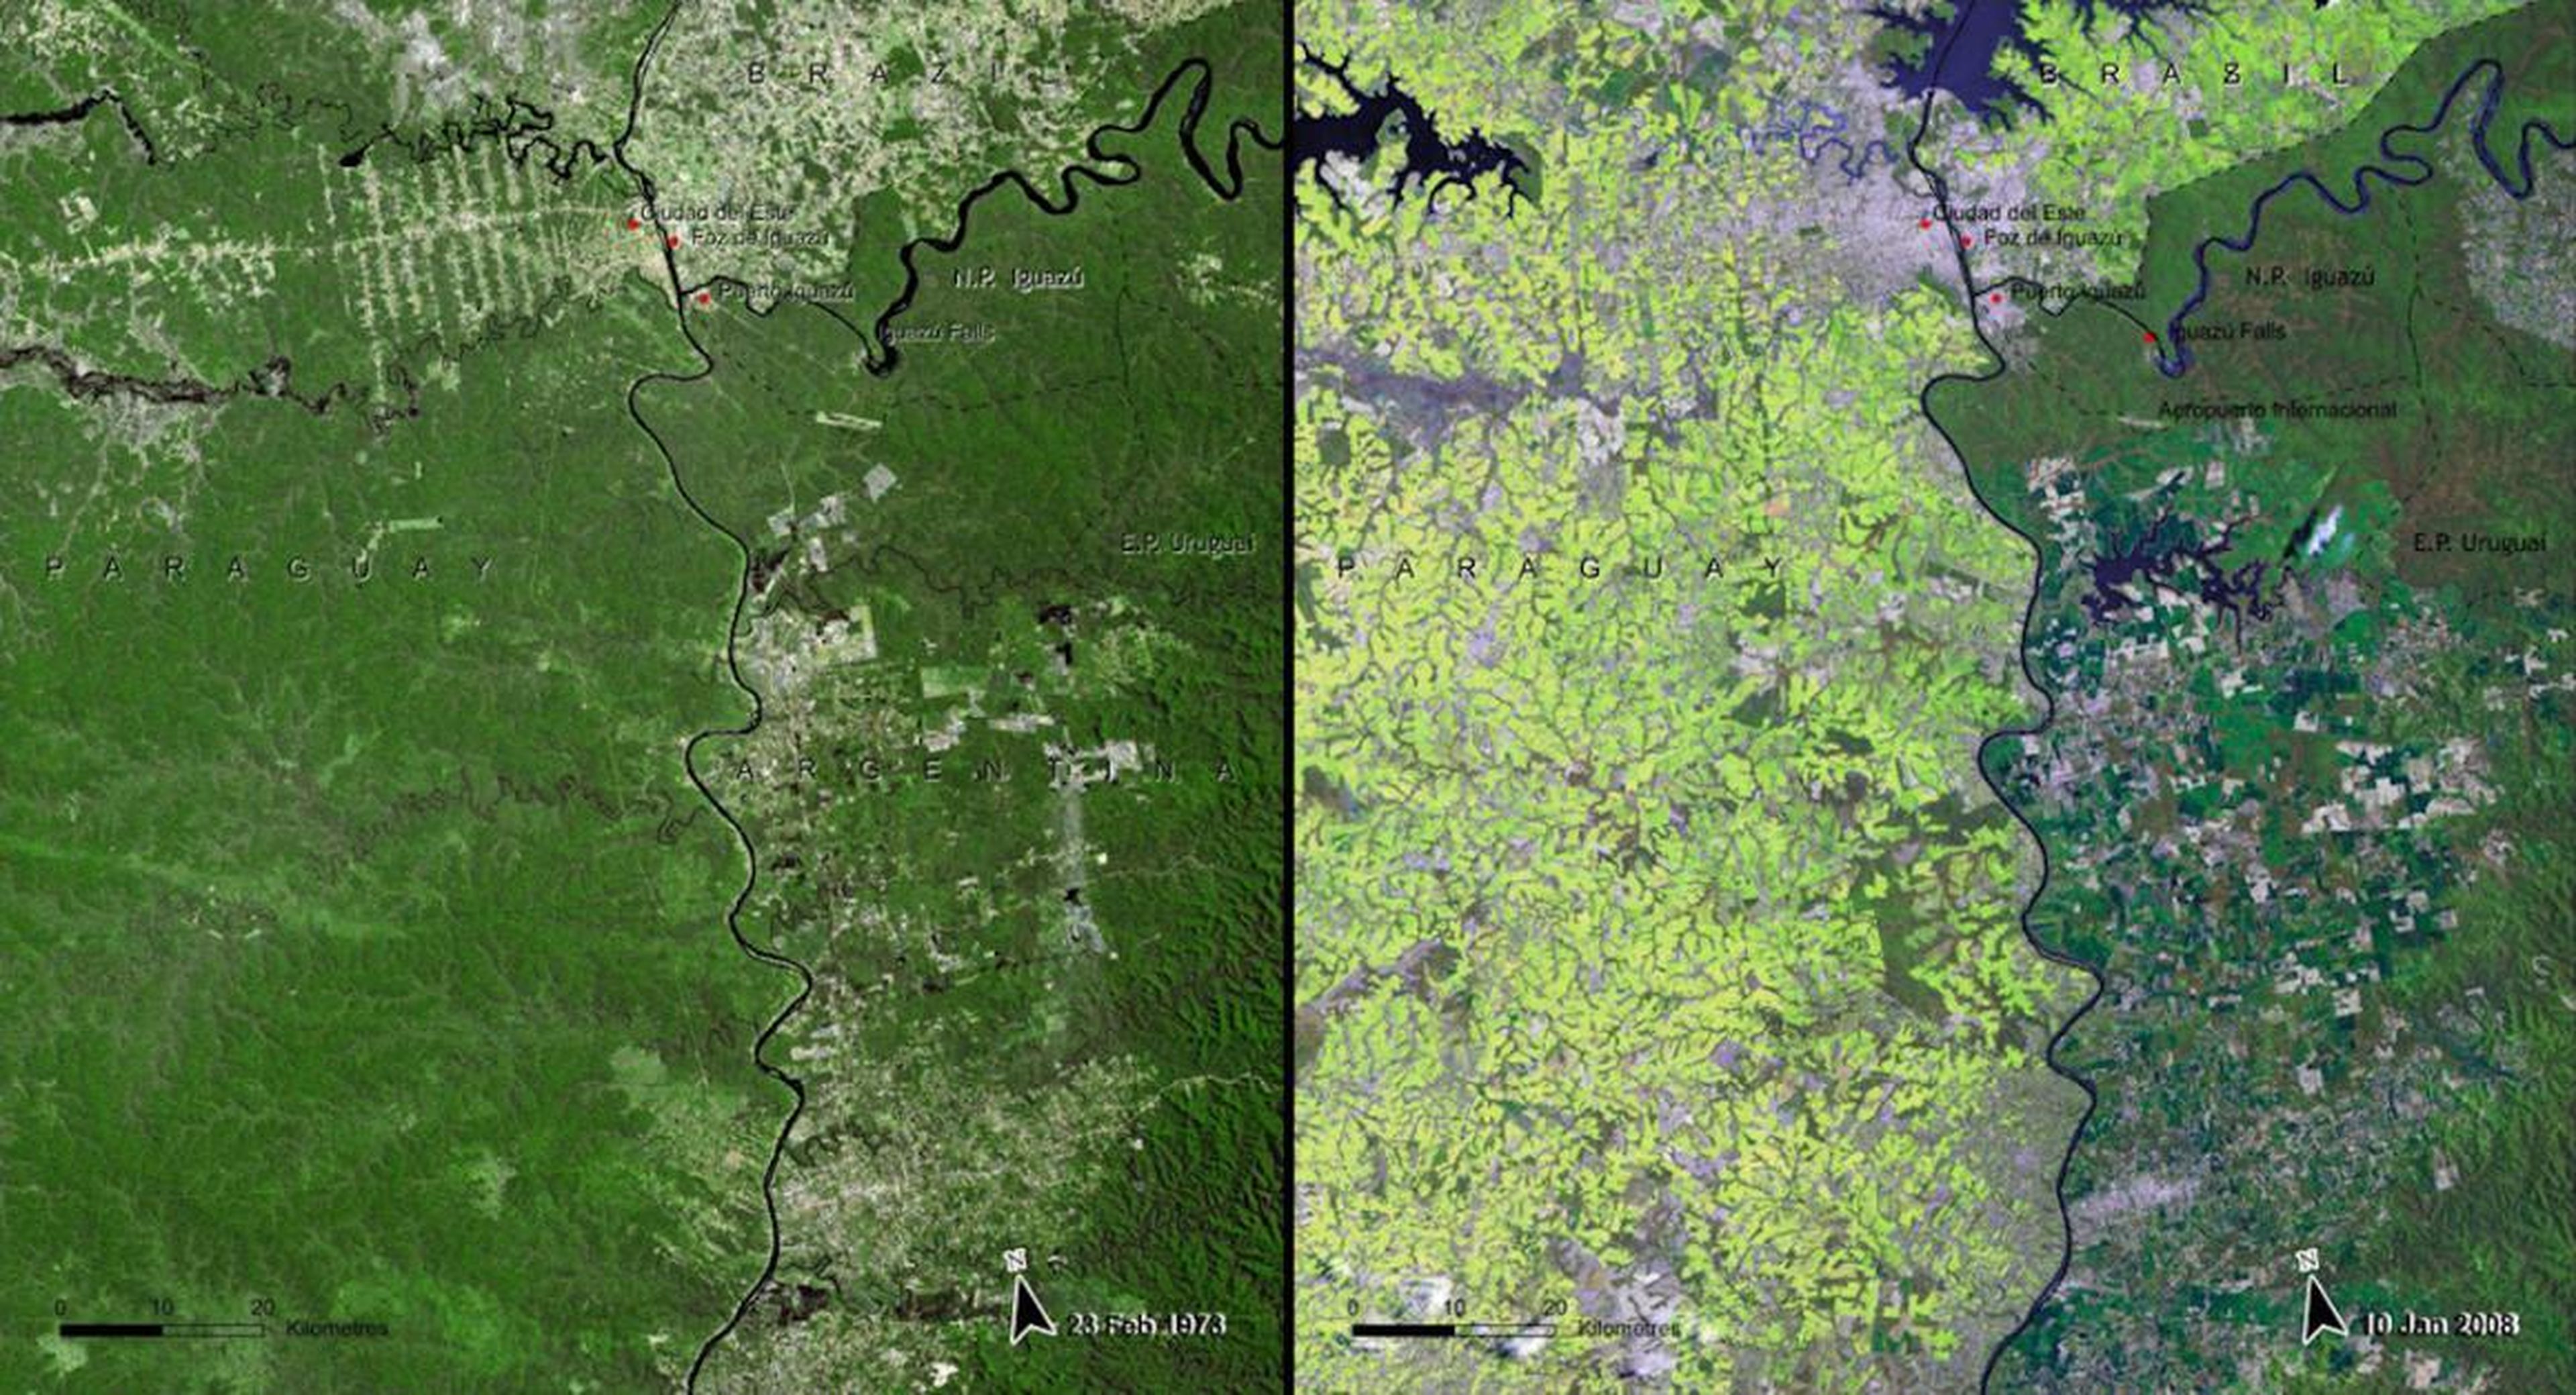 Deforestation is a major issue in South America as well. The Atlantic Forest in Paraguay, seen here, shrank significantly between 1973 (left) and 2008 (right).